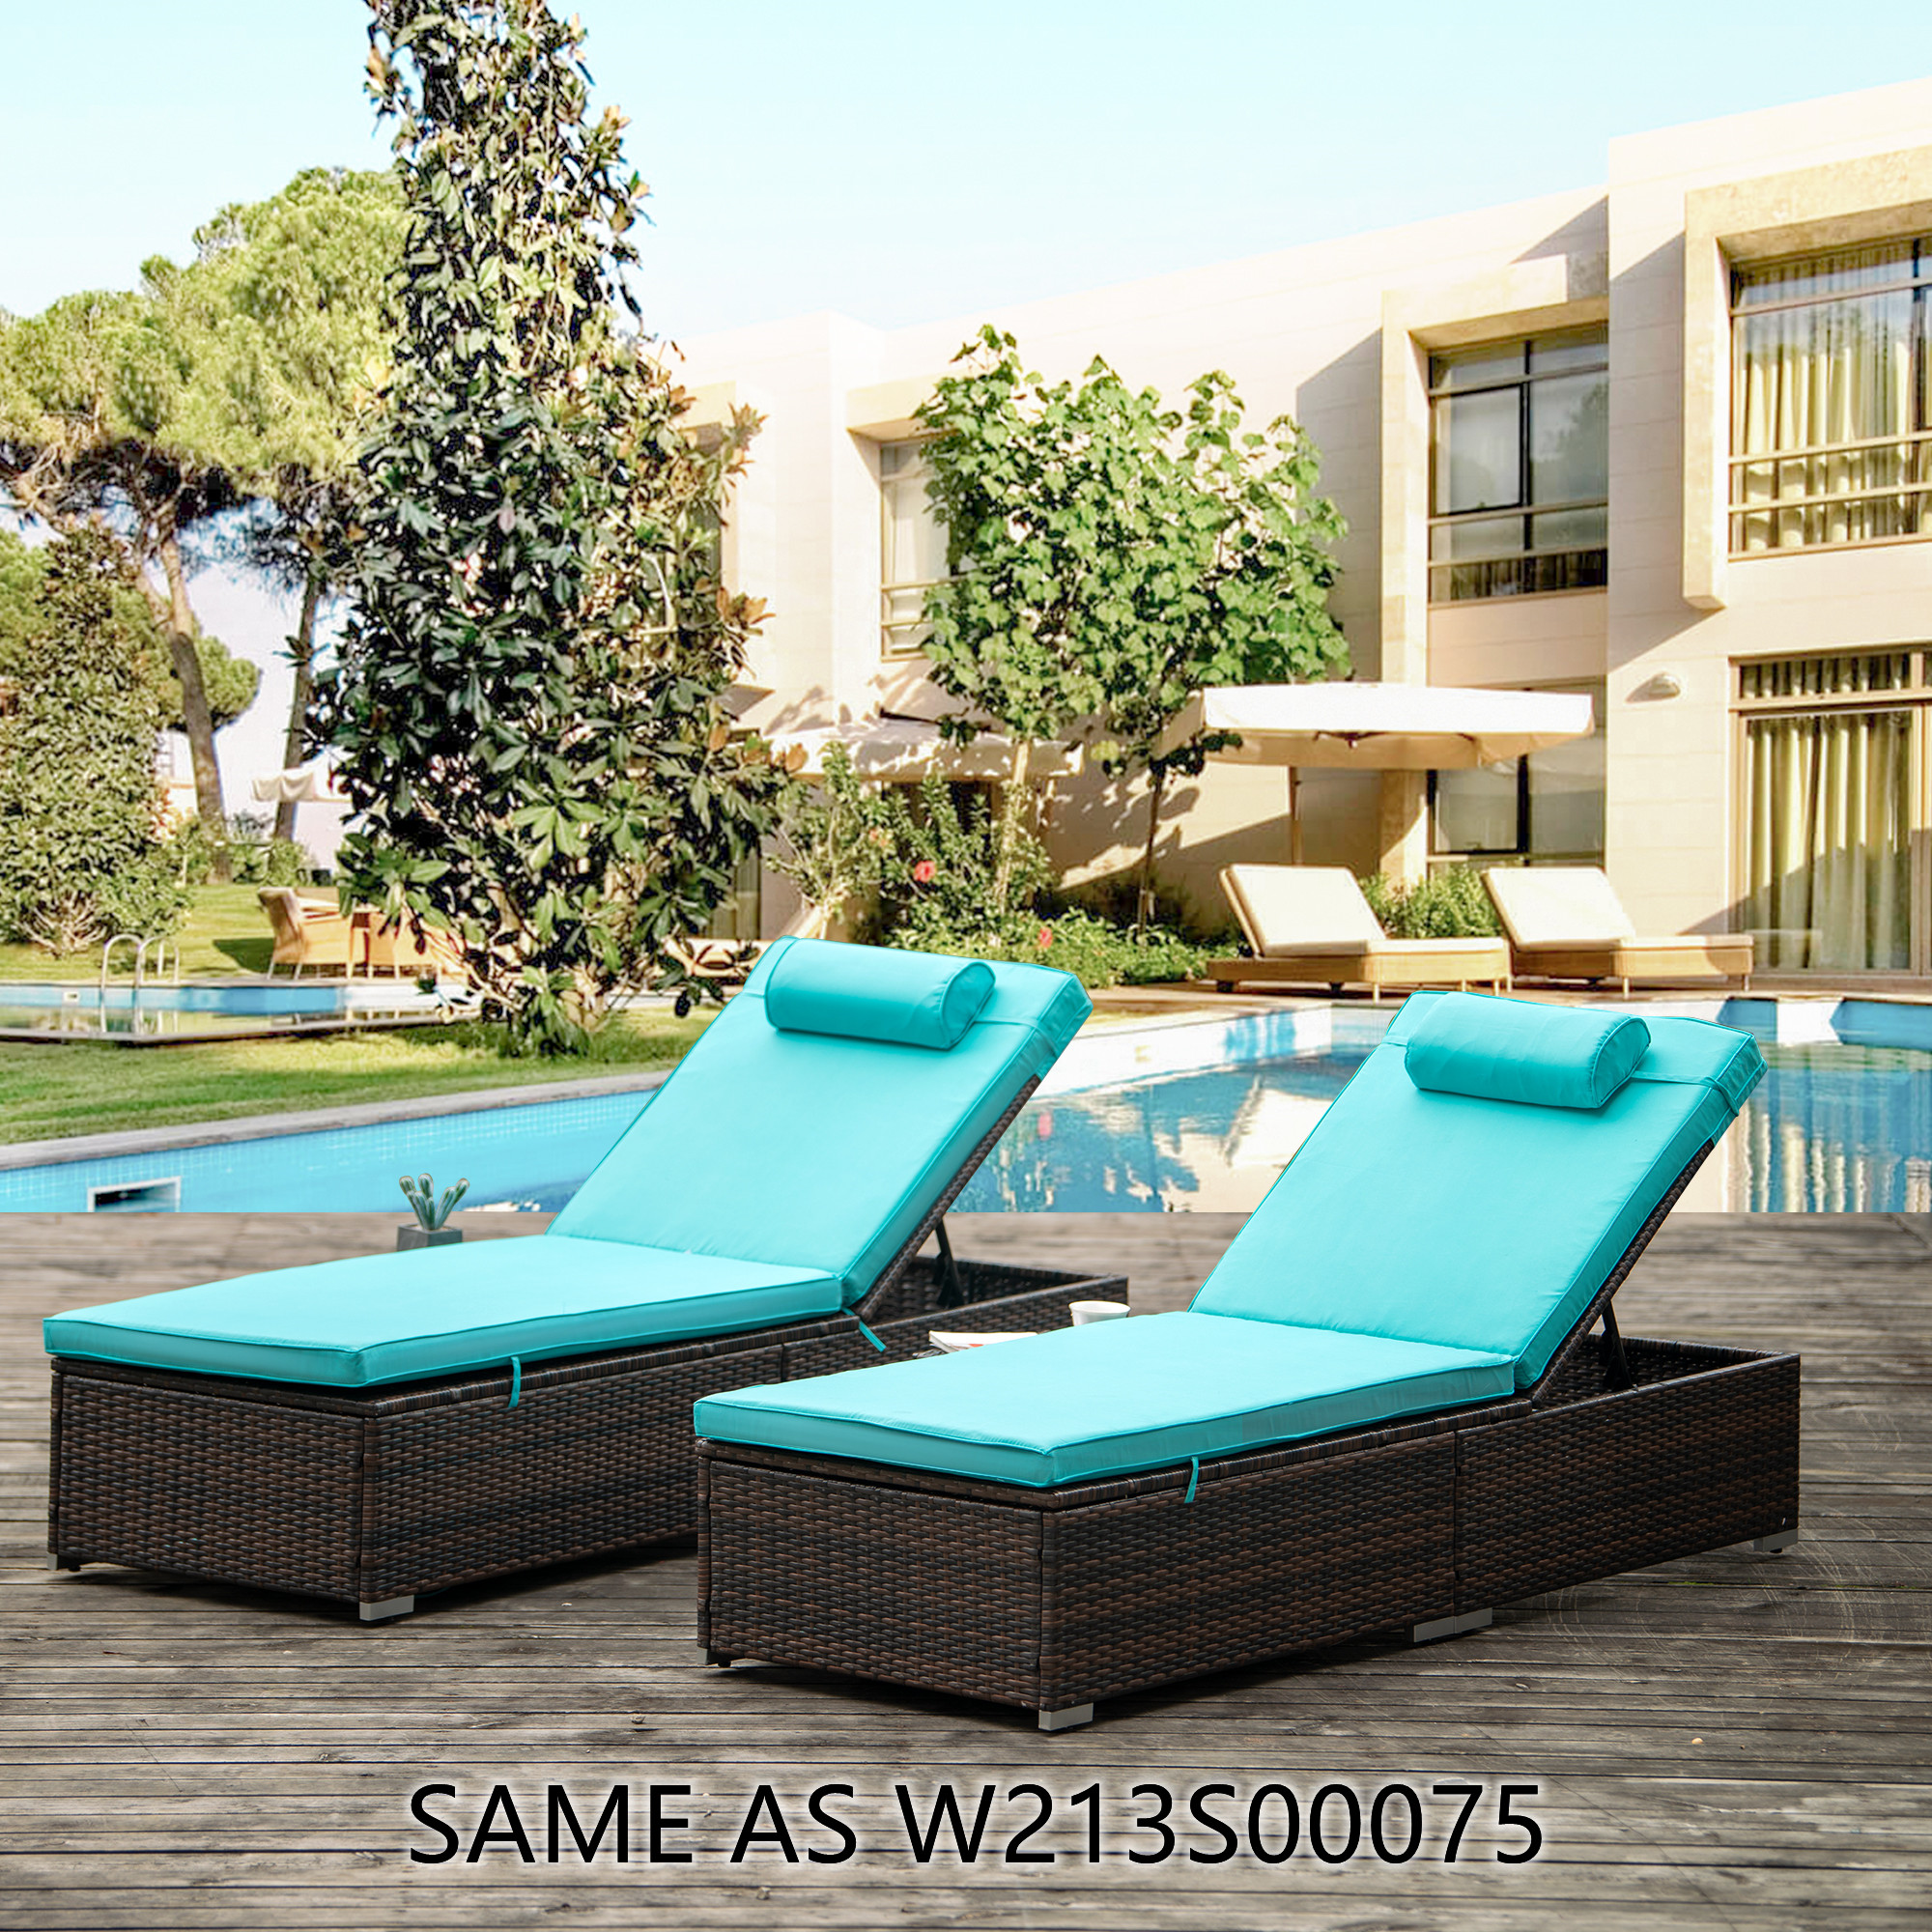 Sportaza SAME AS W213S00075: Outdoor PE Lounge - 2 Piece Patio Brown Rattan Reclining Chair Furniture Set Beach Pool Adjustable Backrest Recliners with Side Table and Comfort Head Pillow - image 1 of 7